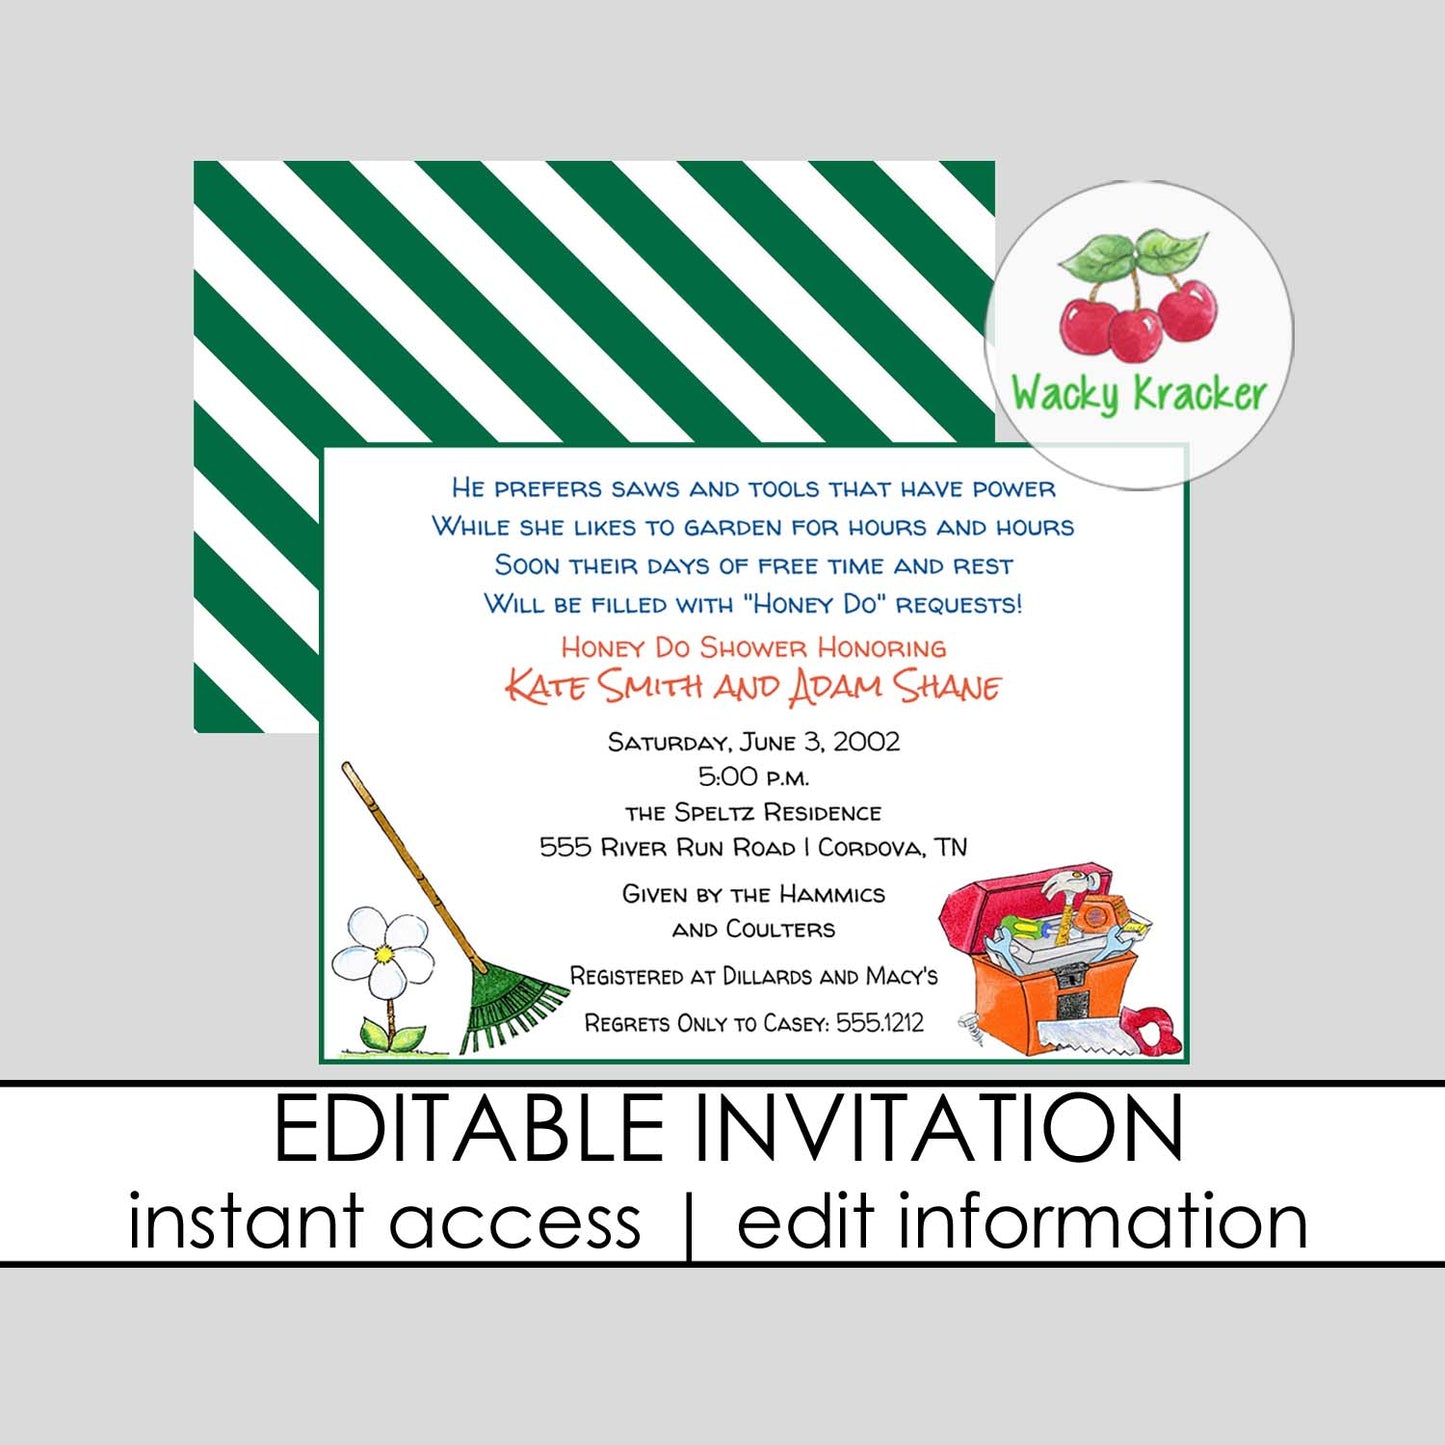 Lawn and Tool Bridal Shower Invitation